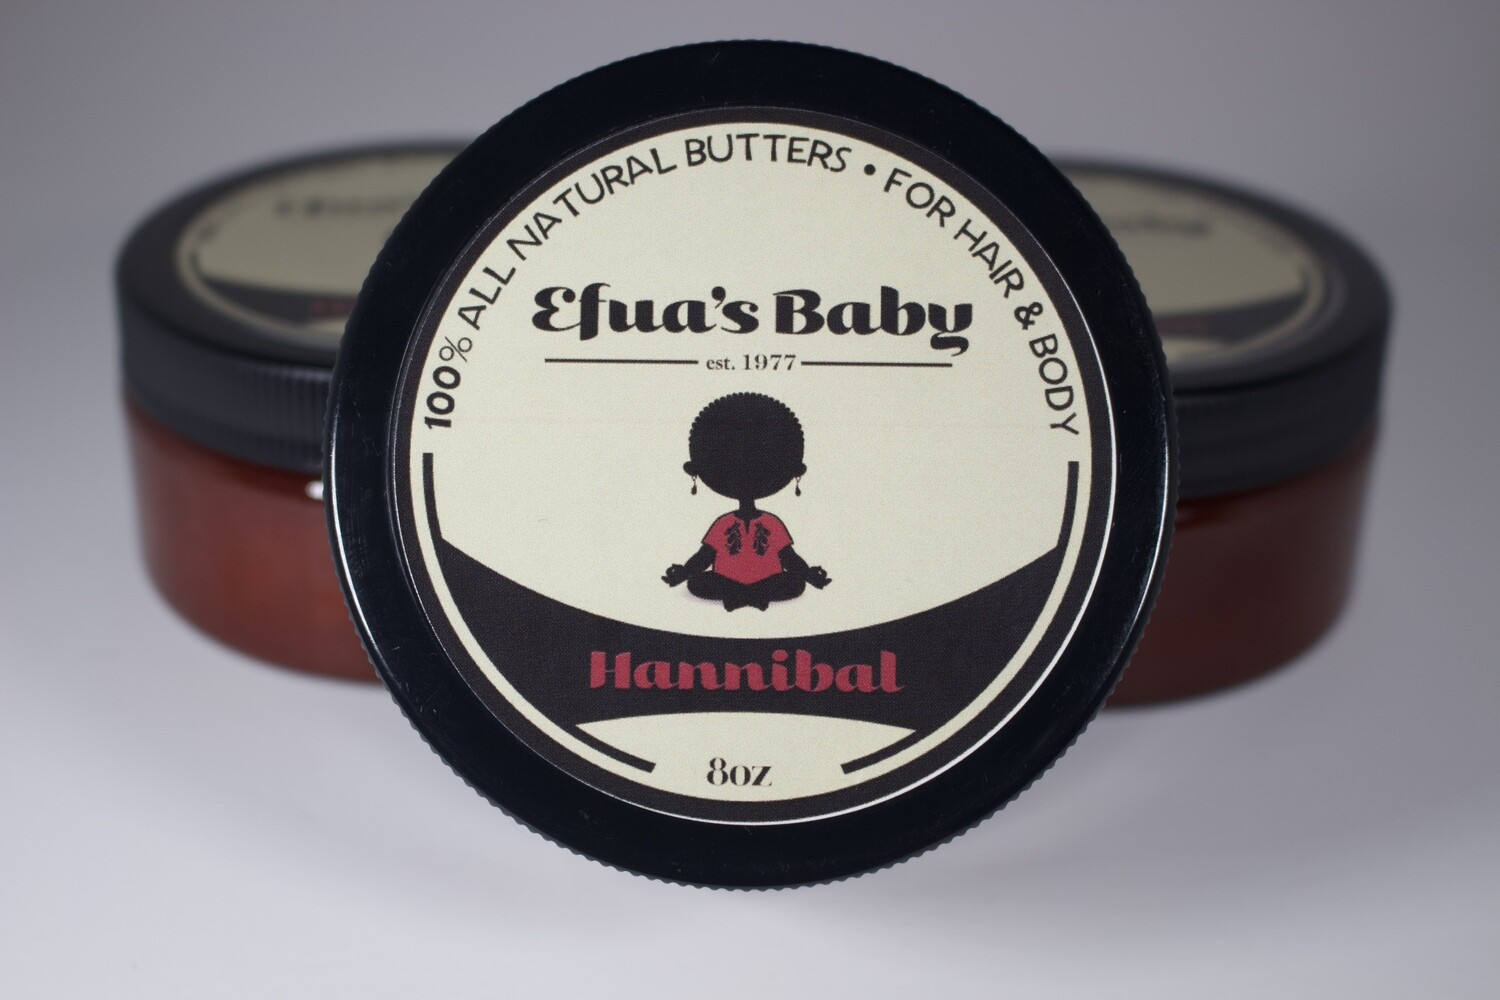 Hannibal 8oz KING Series Body Butters